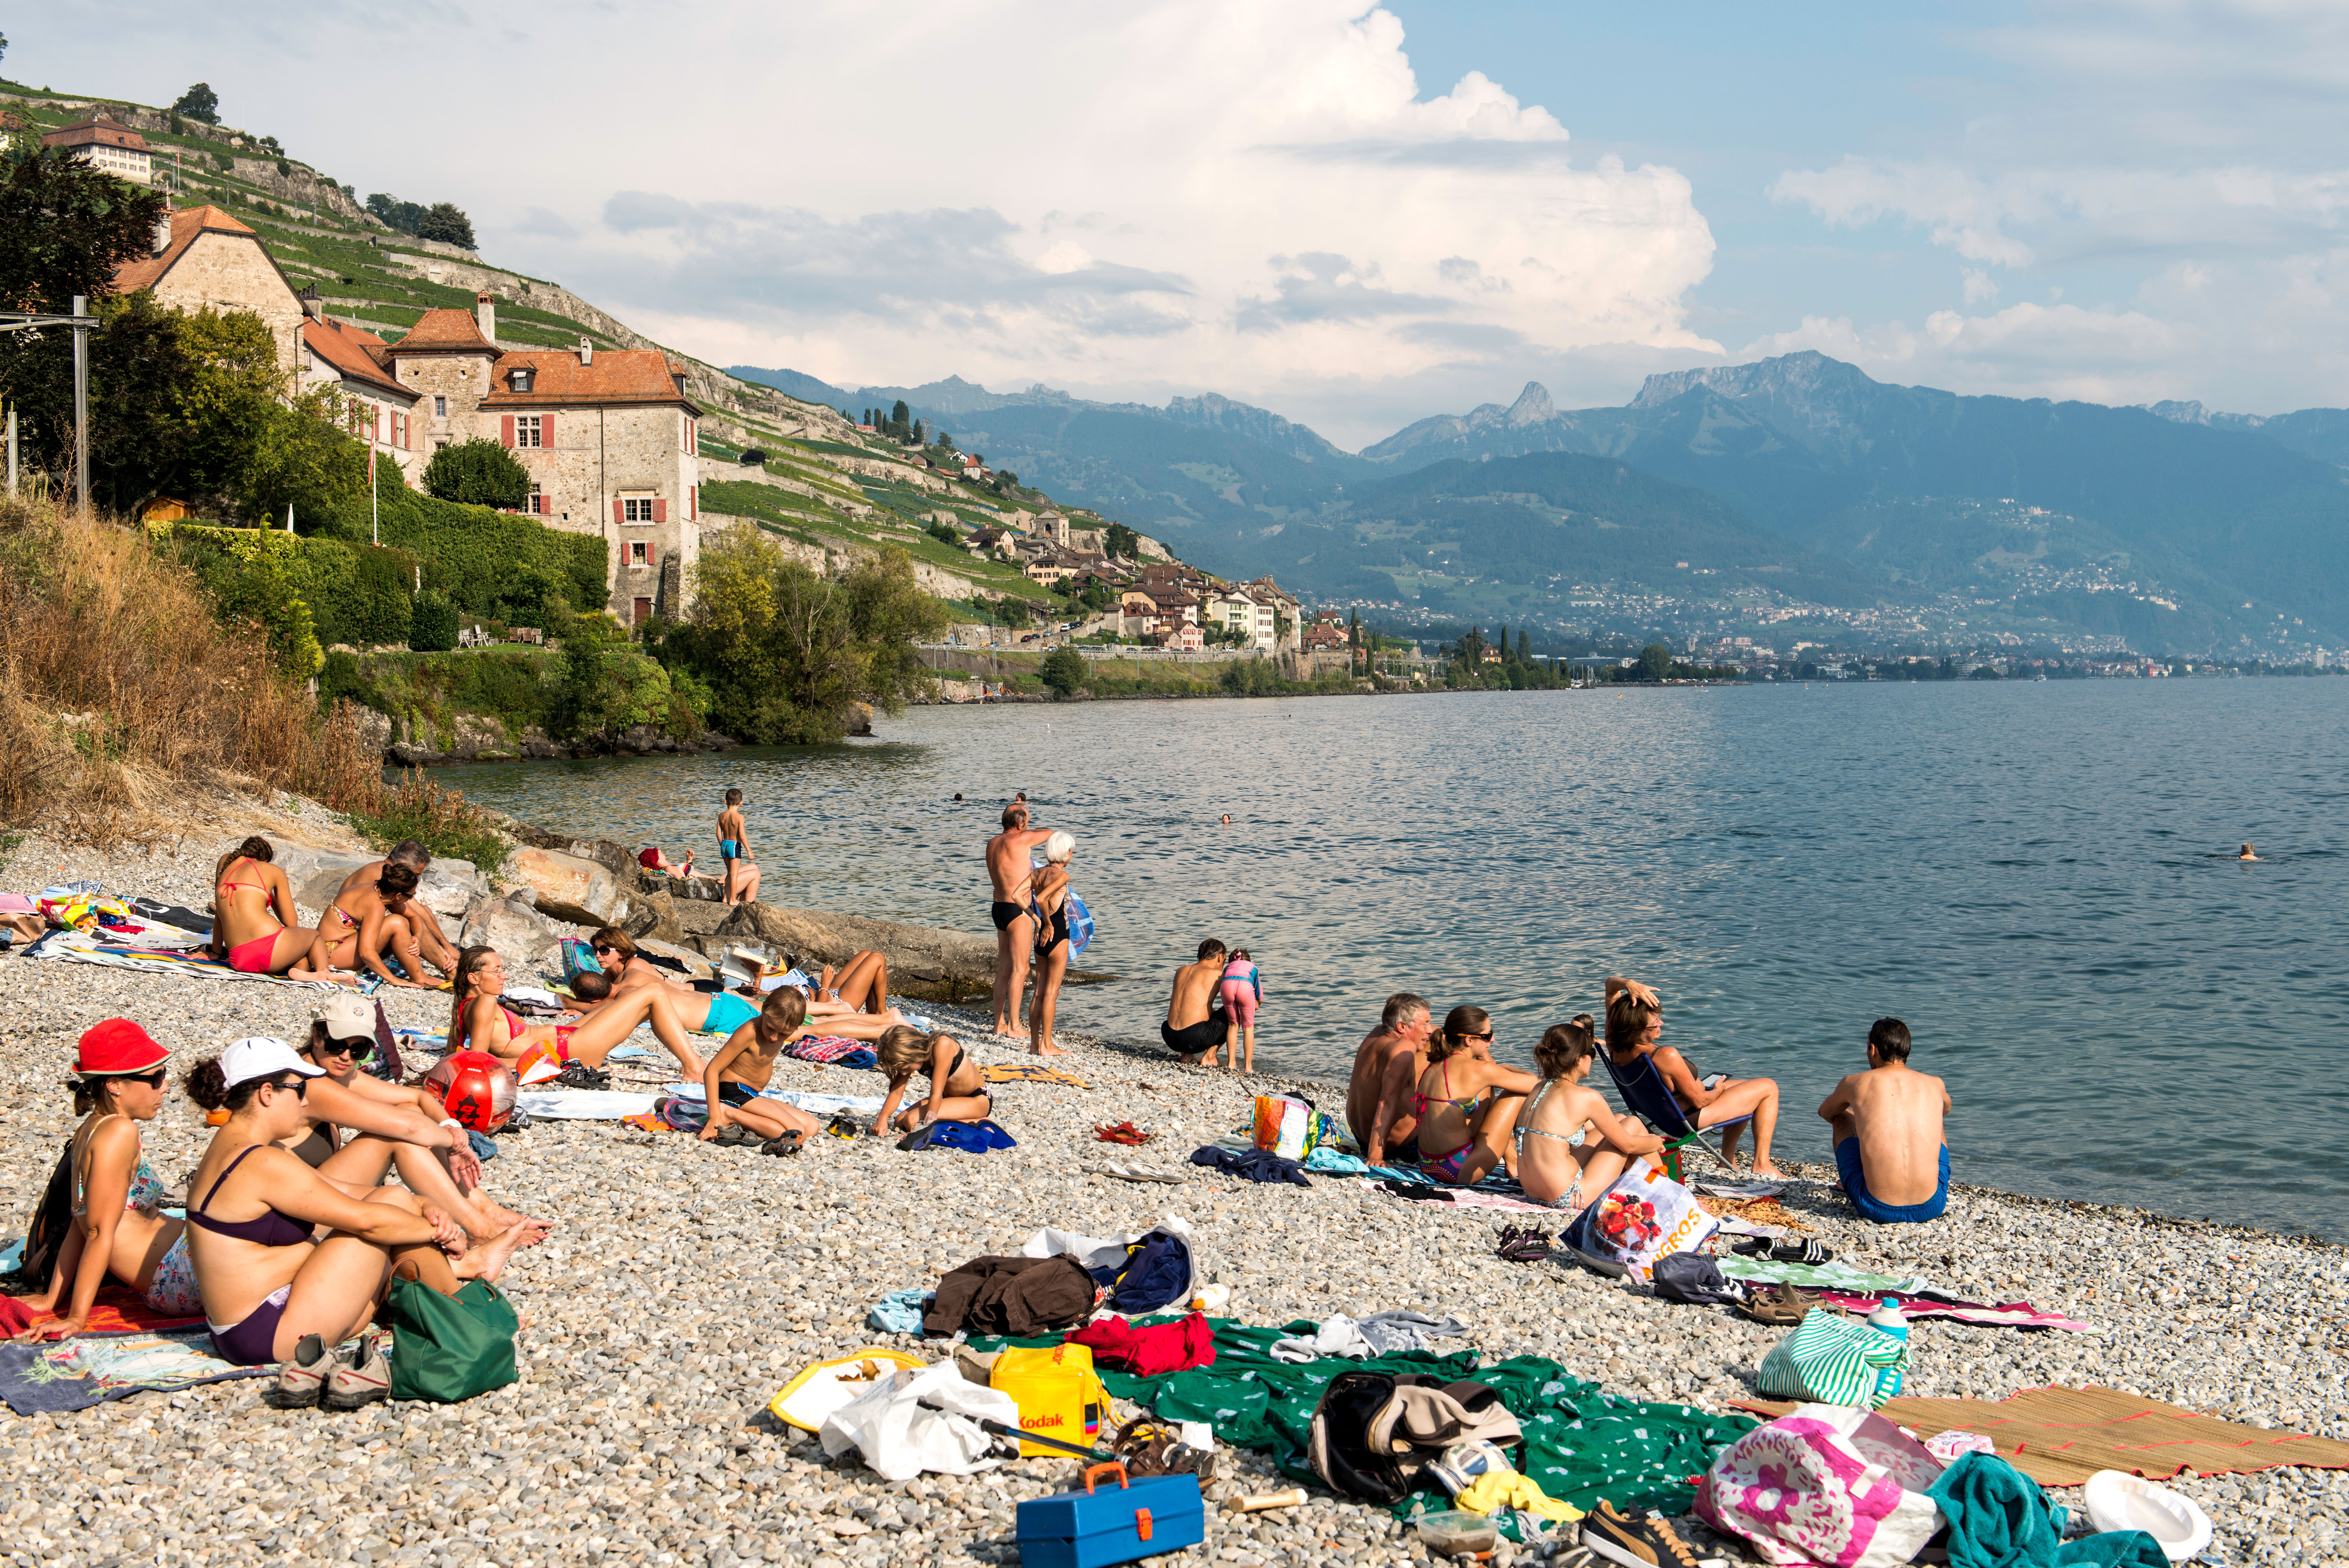 Swimming in Lake Geneva is becoming popular with tourists